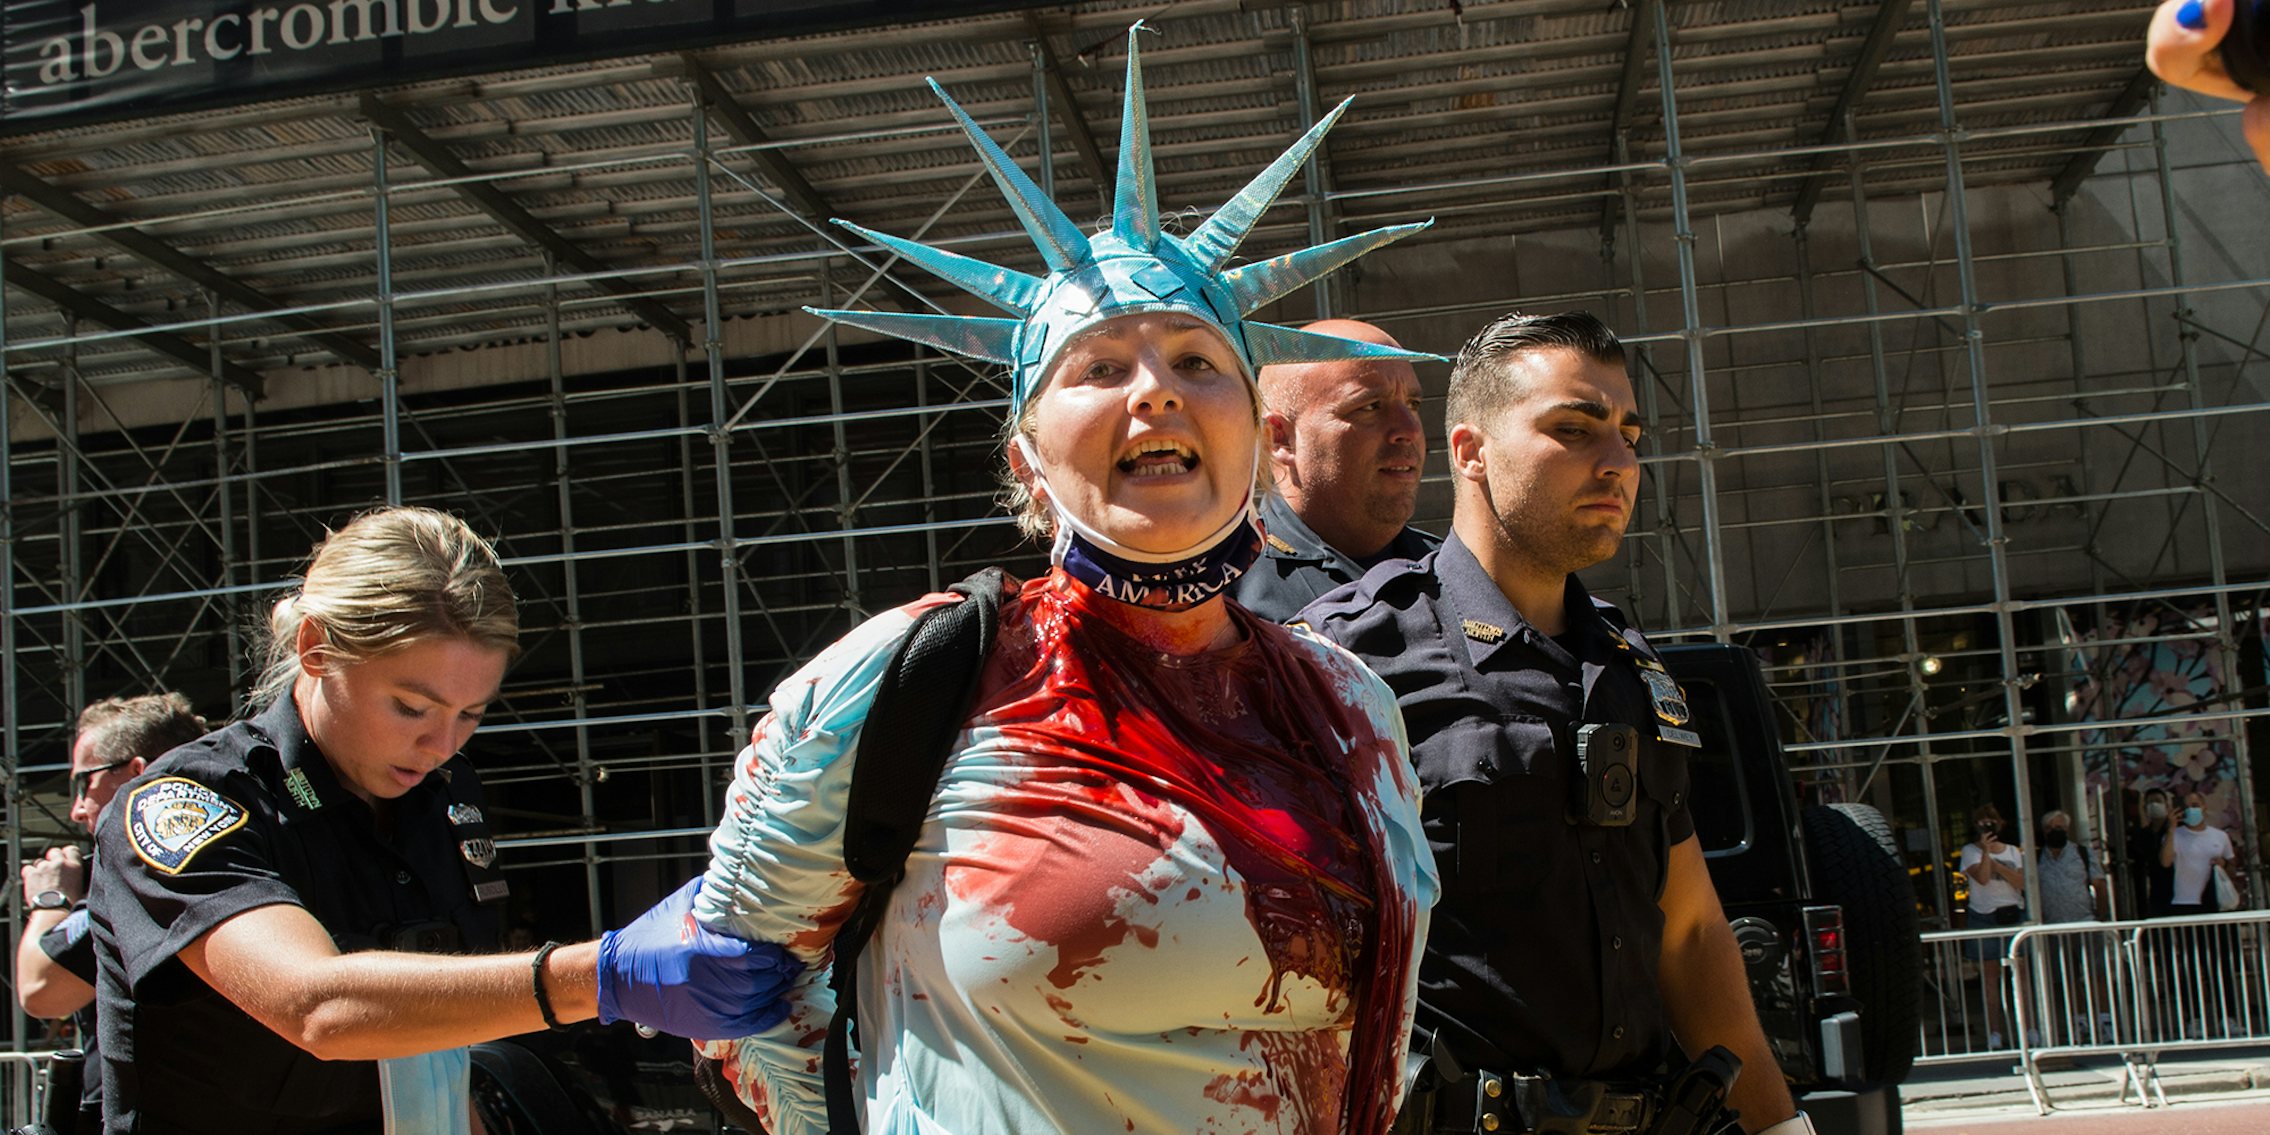 Juliett Germanotta, dressed as Statue of Liberty, vandalized the Black Lives Matter mural outside of Trump Tower Fifth Avenue